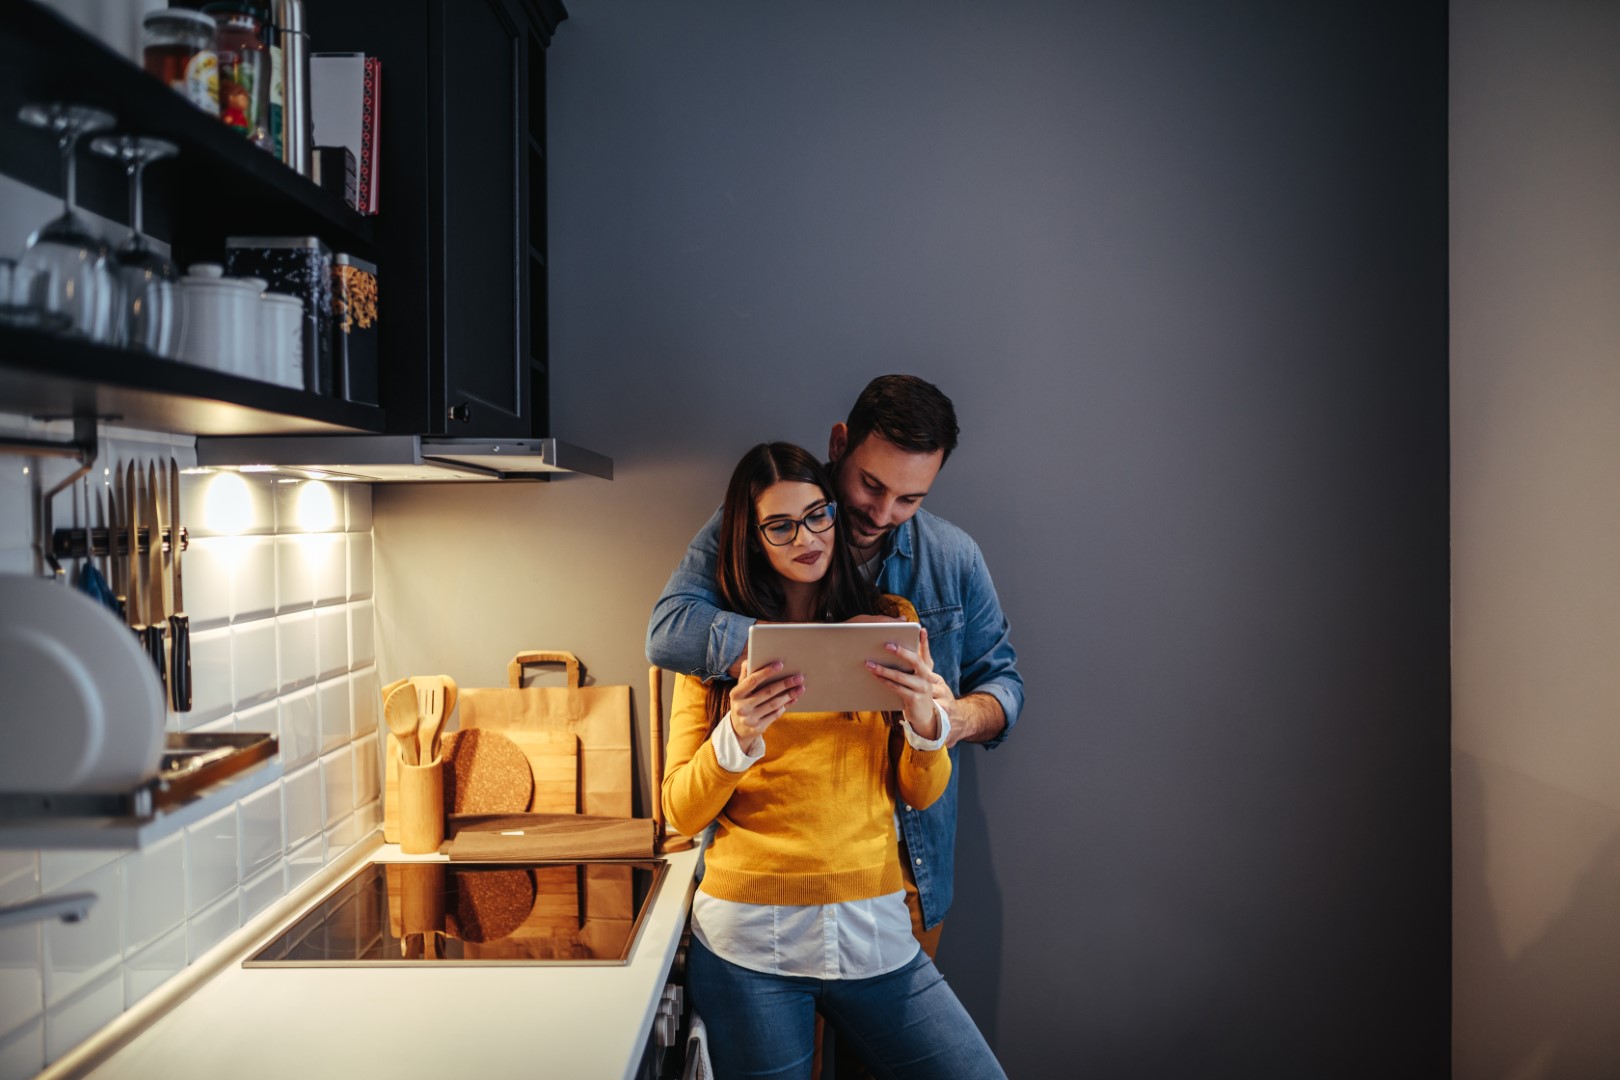 A young couple looking at tablet computer in apartment kitchen